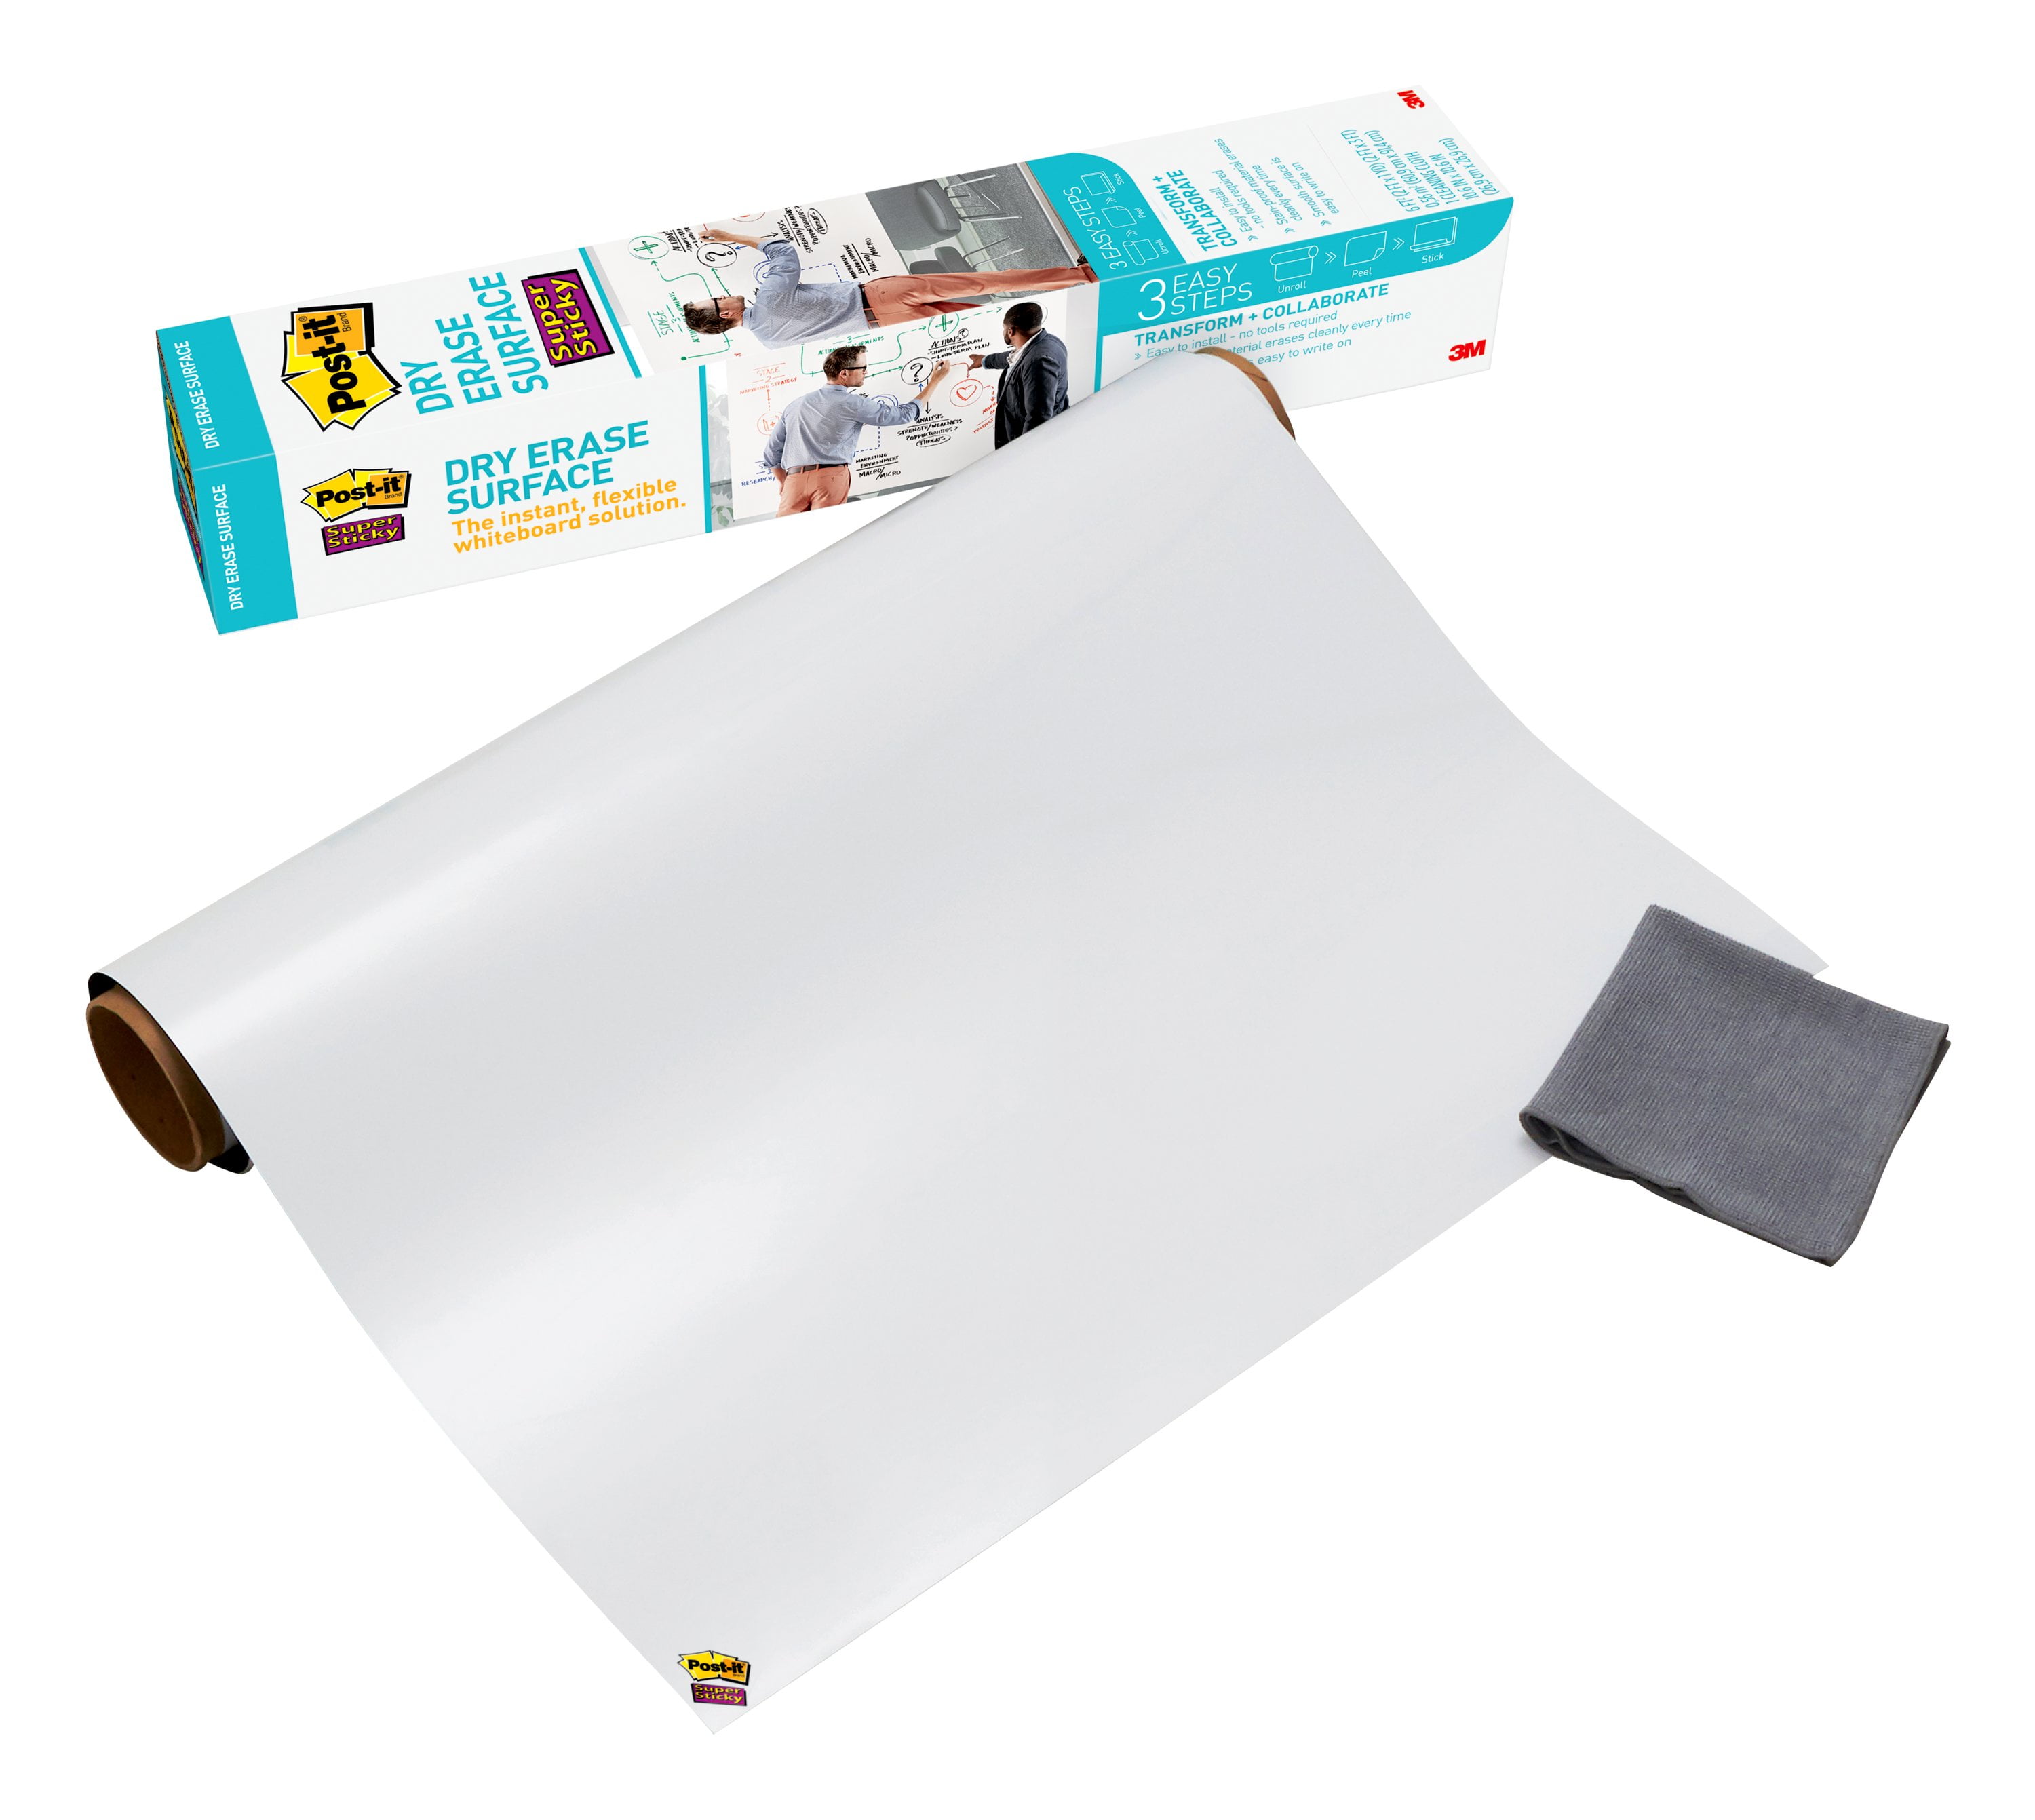 Gowrite Self-Adhesive White 1 Roll Dry Erase Roll 24" x 10' 